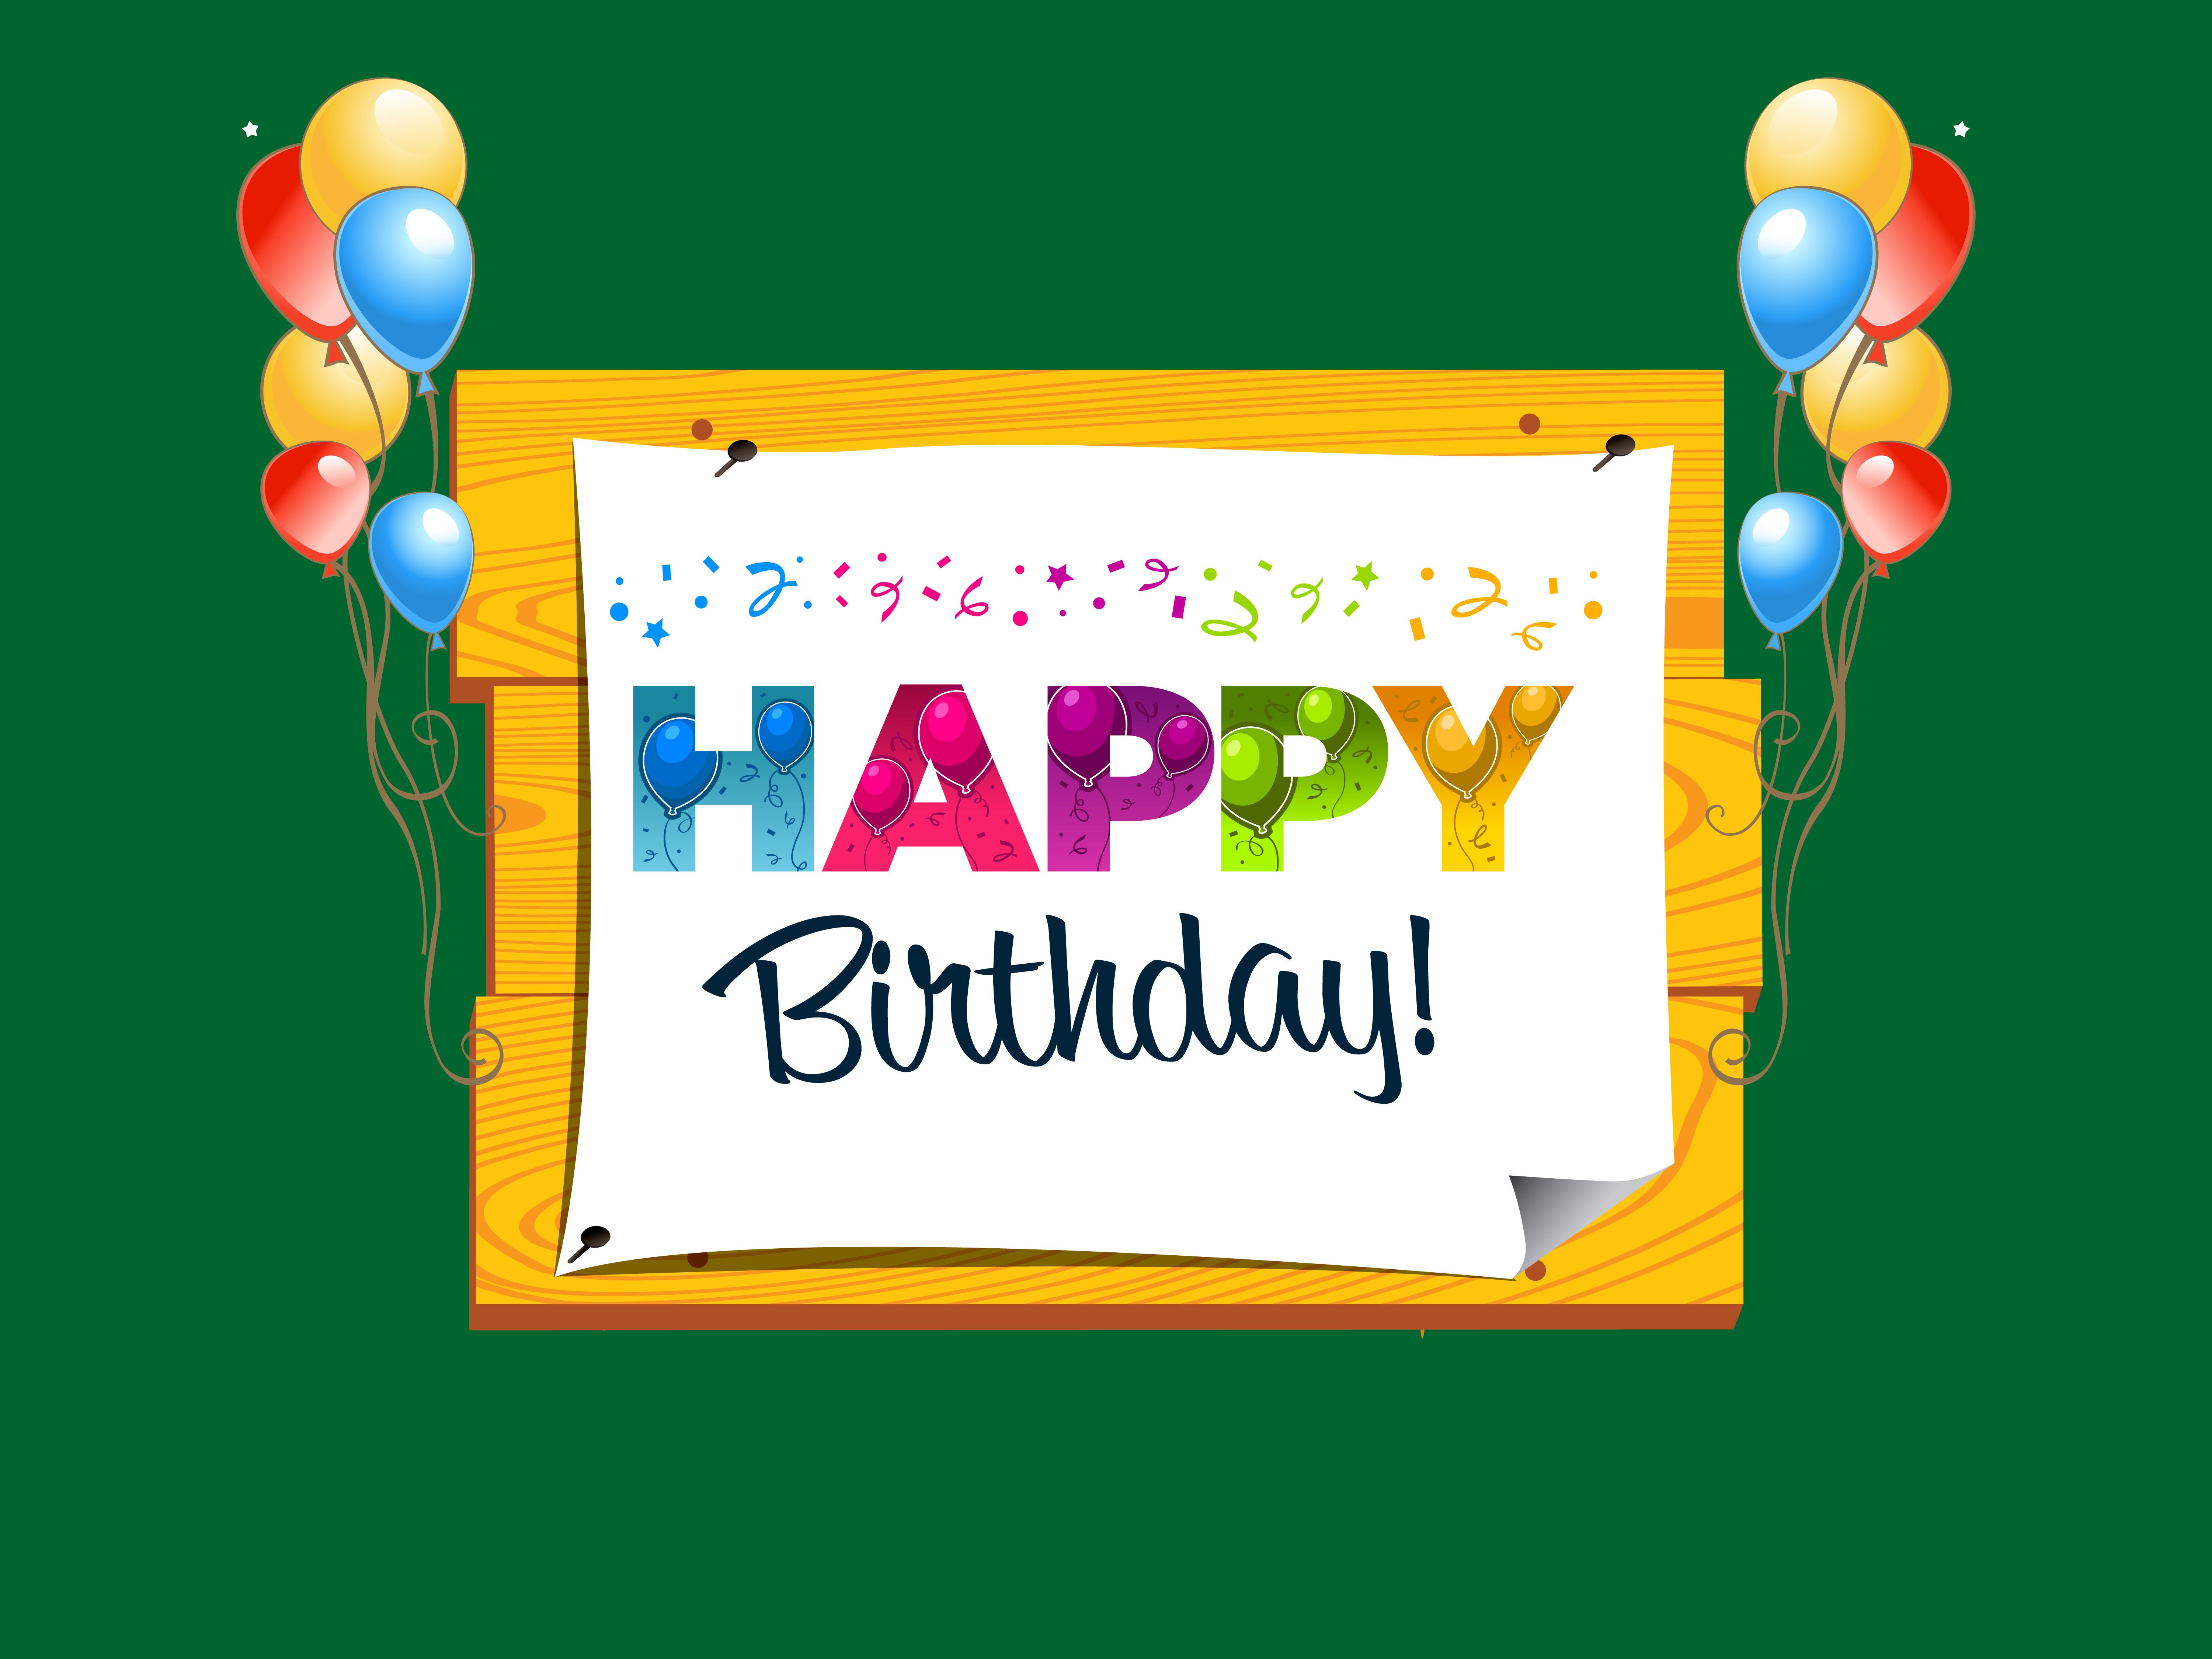 Birthday HD Backgrounds Free download 